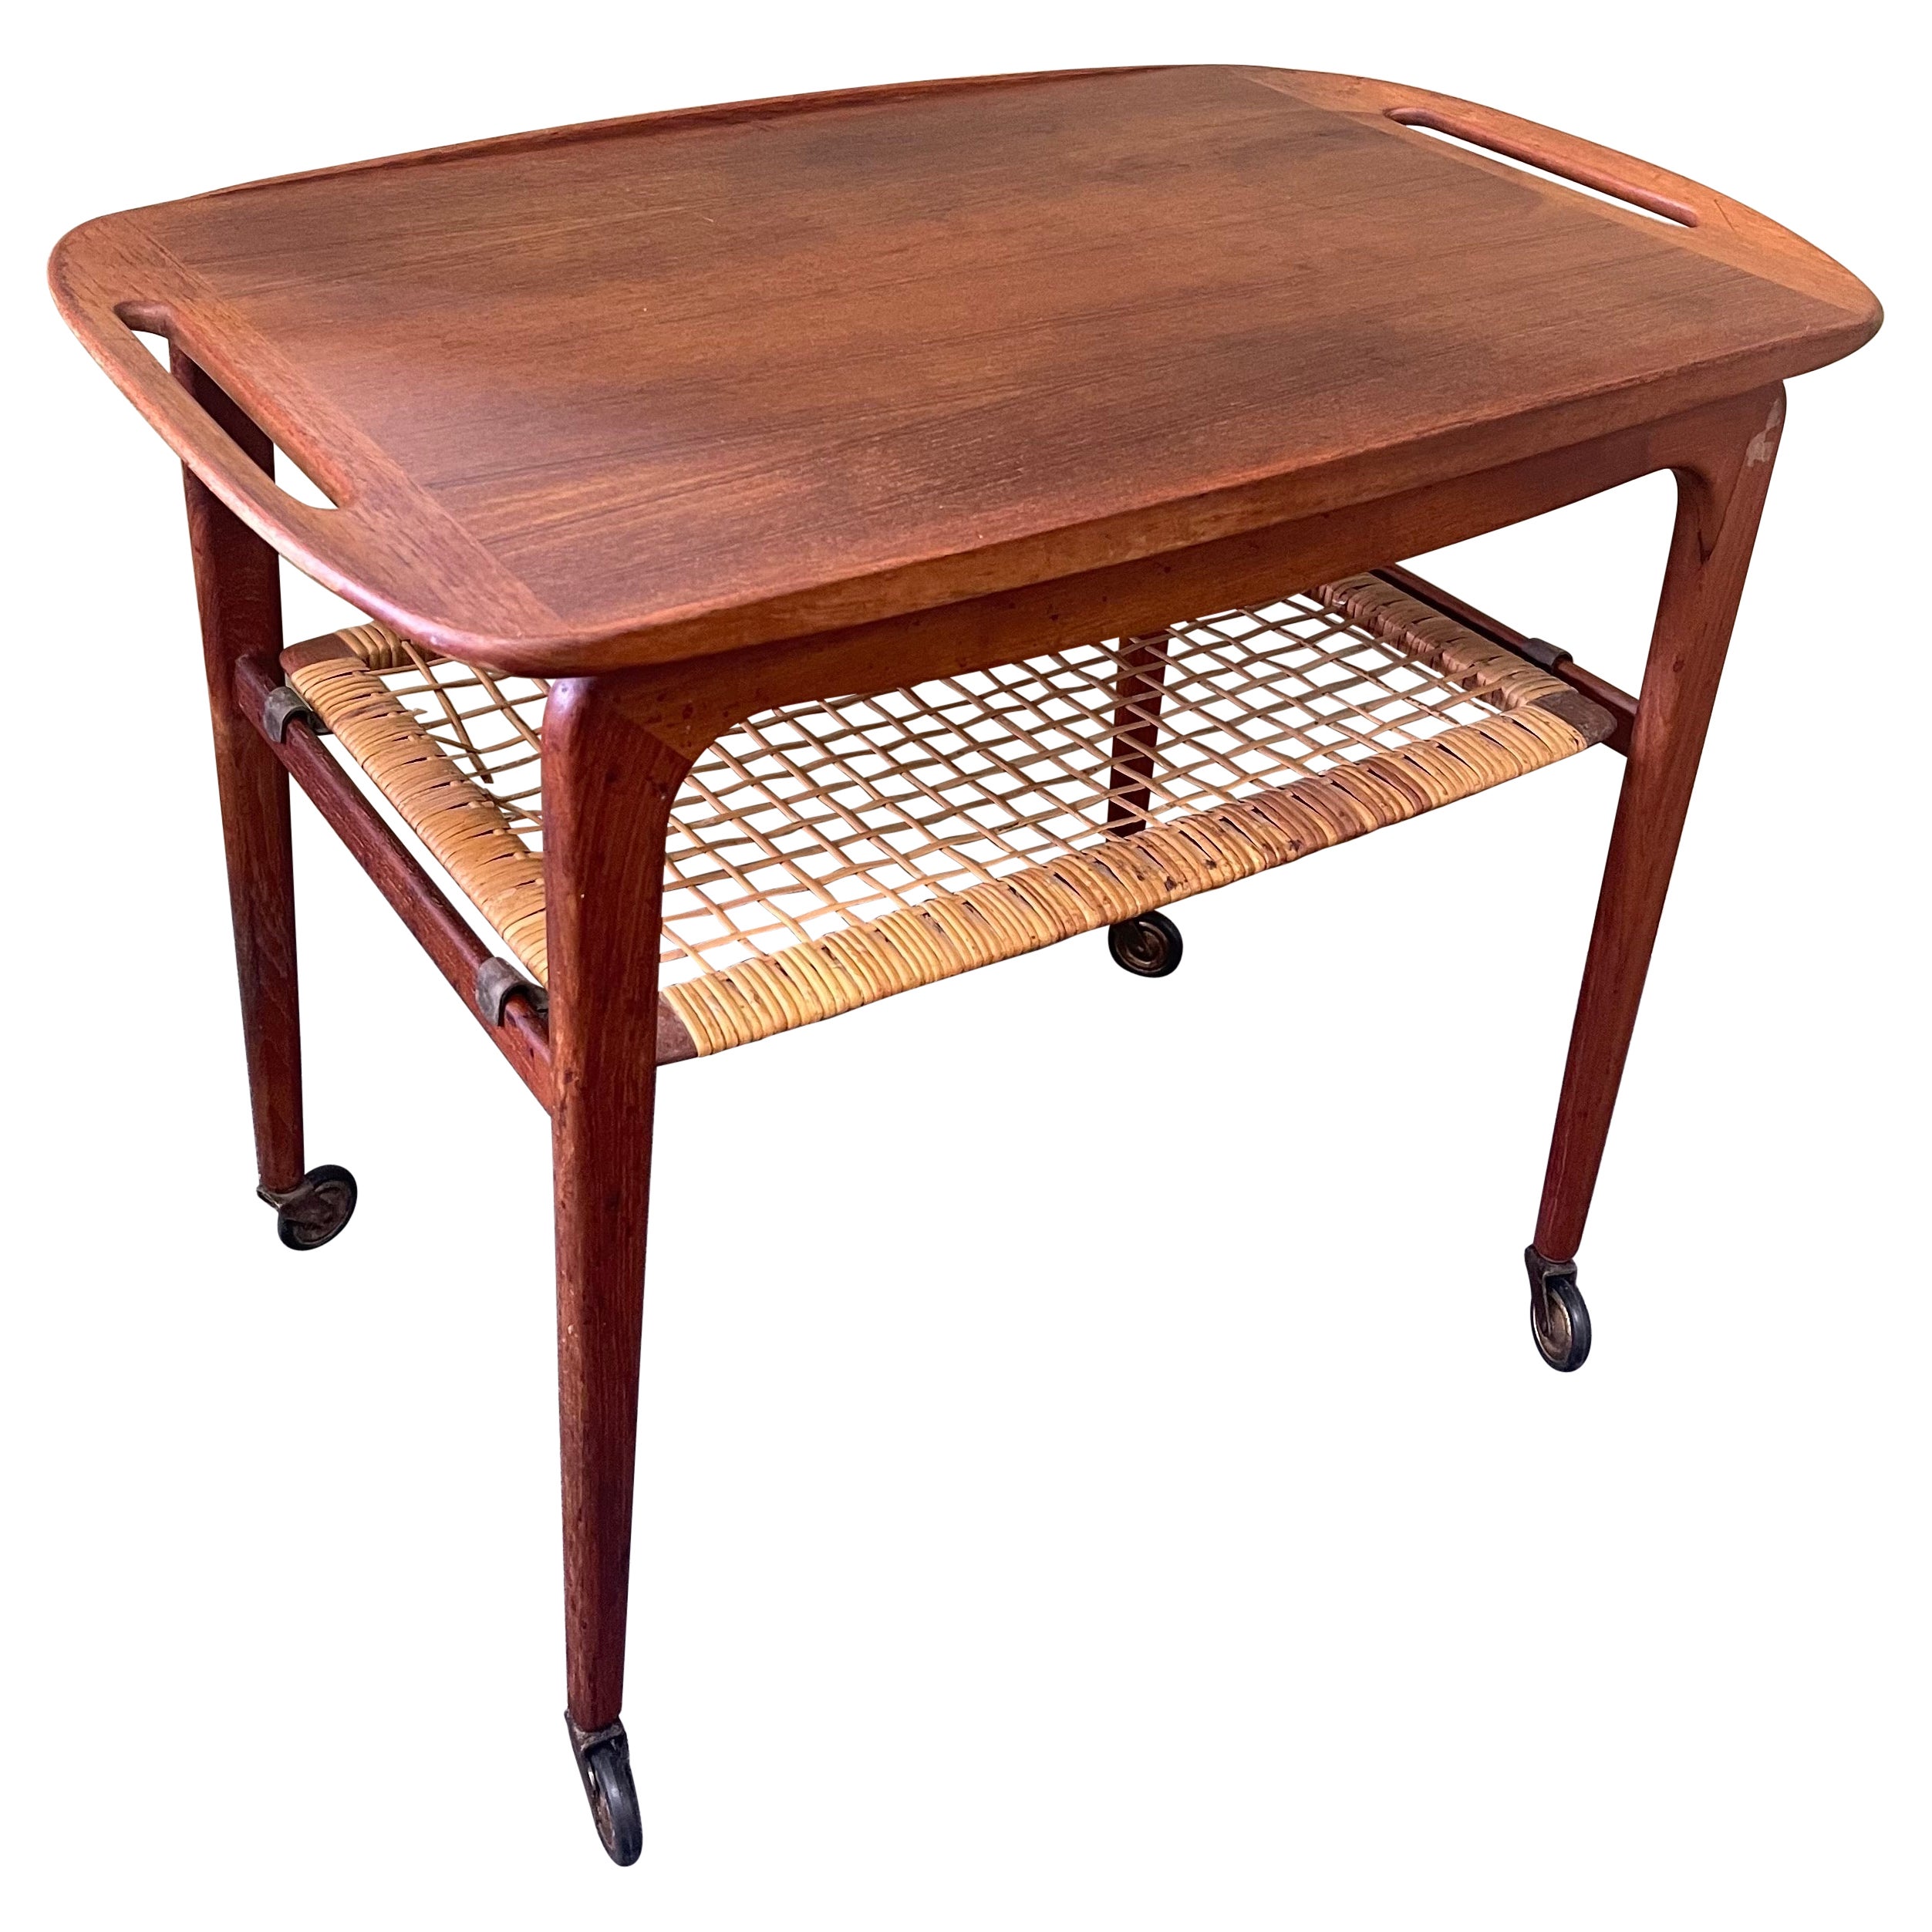 Danish Modern Teak Bar Cart with Removable Tray by Johannes Andersen / Silkeborg For Sale